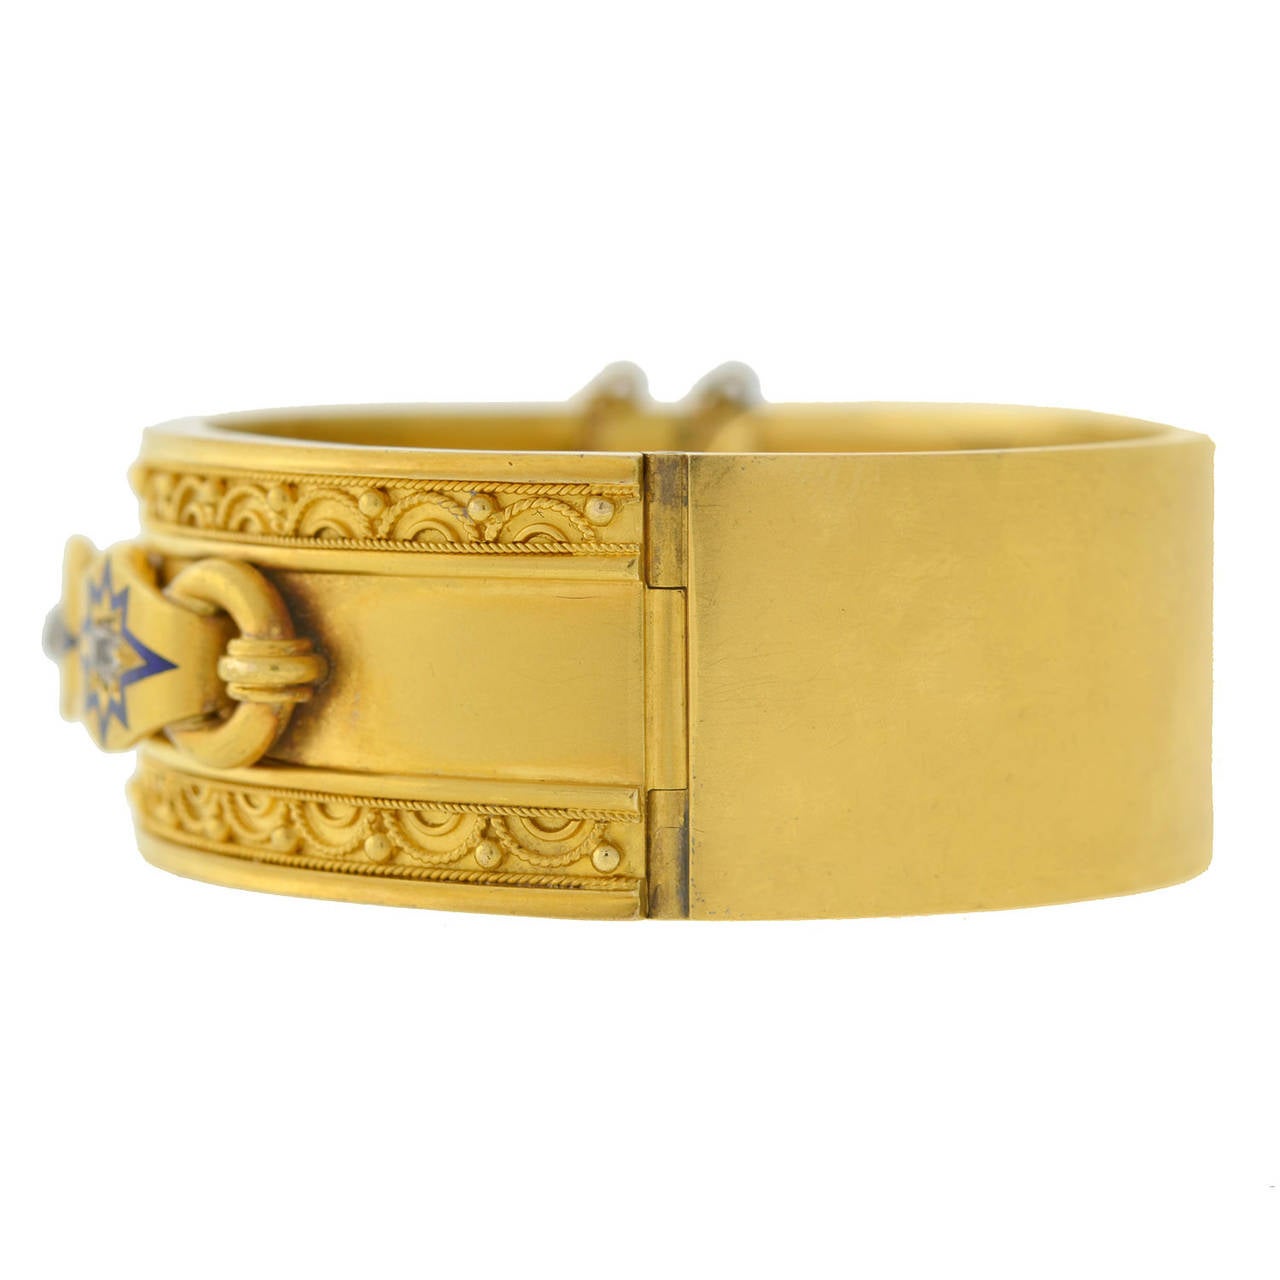 An absolutely outstanding bangle bracelet from the Victorian (ca1880) era! This wide bangle is made of vibrant 18kt yellow gold and has an exceptional three-dimensional design on the front surface. The top and bottom edges have an intricate Etruscan